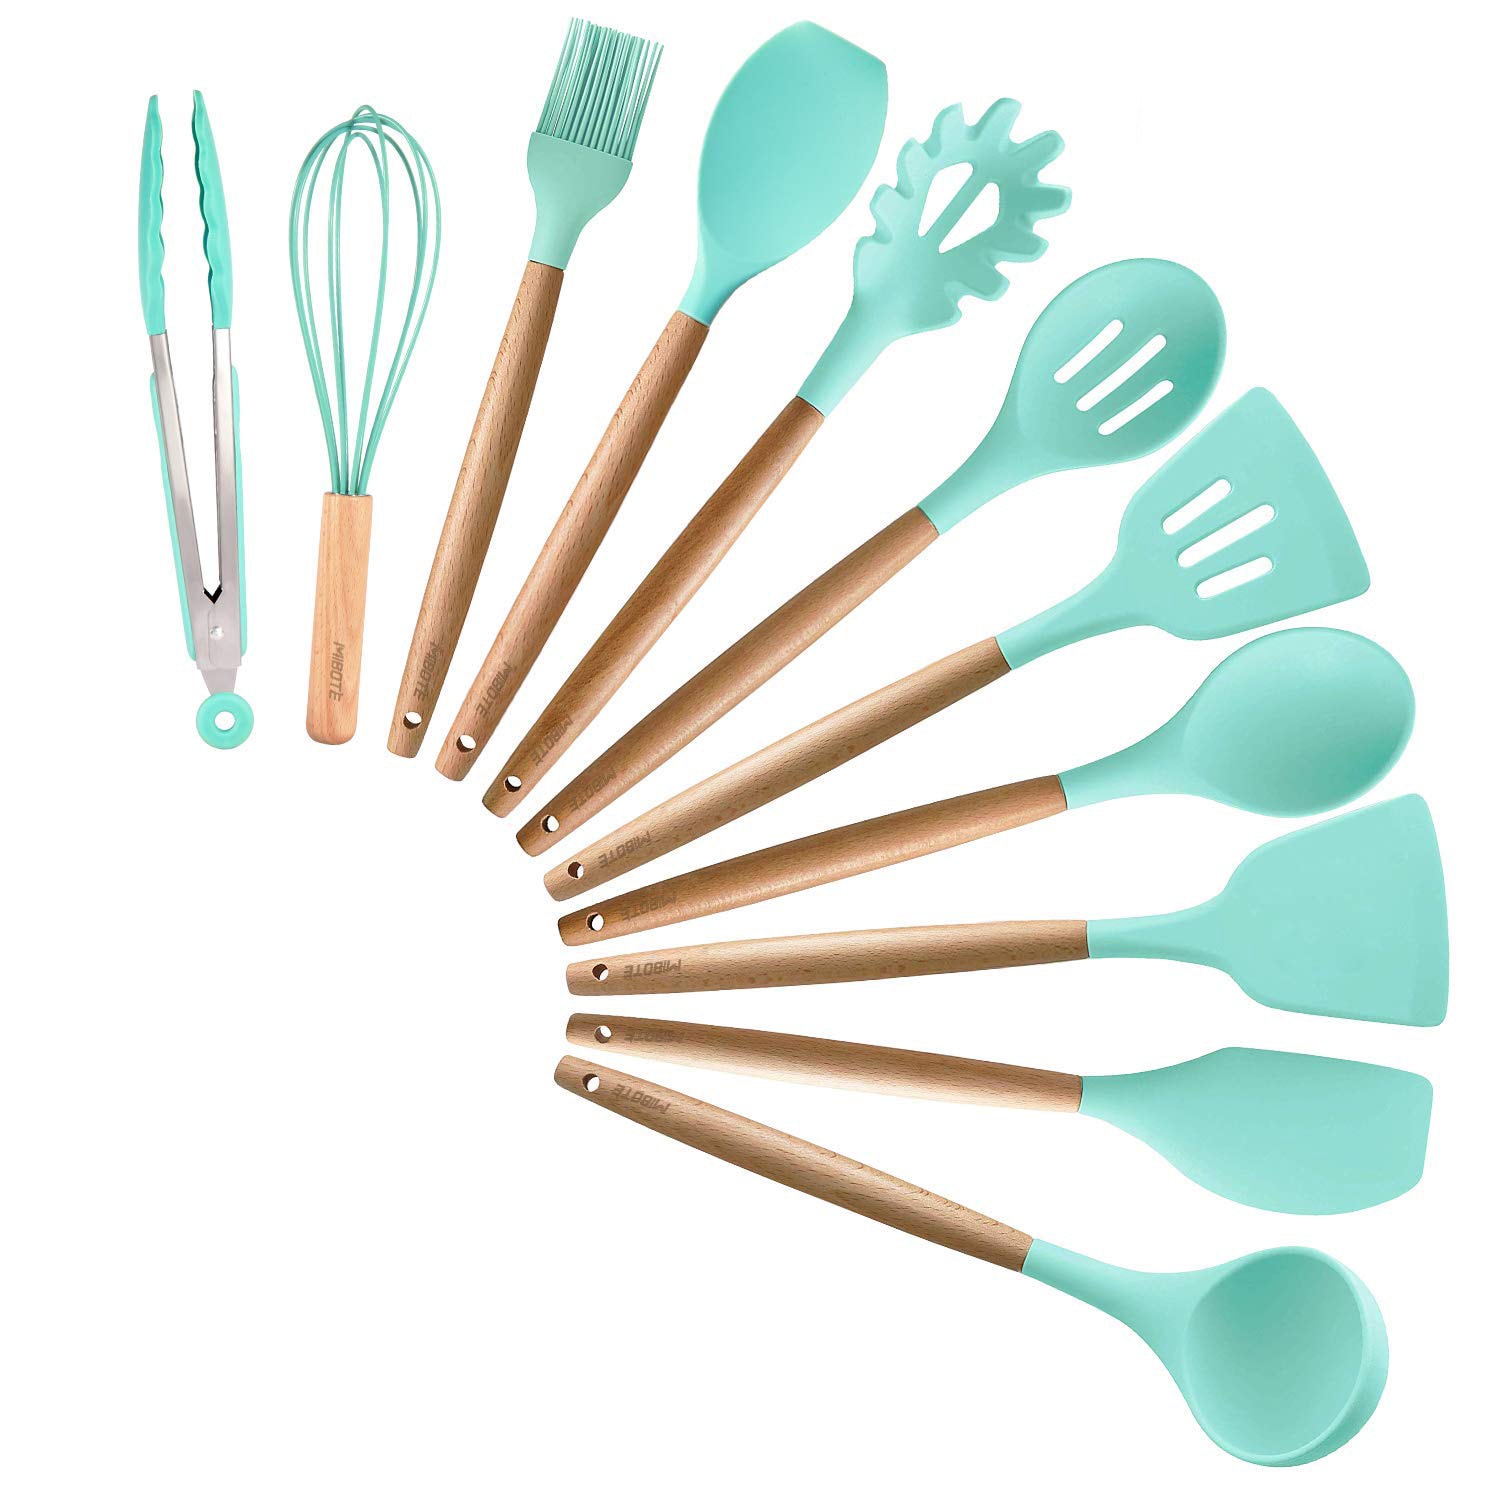 a set of silicon cooking utensils